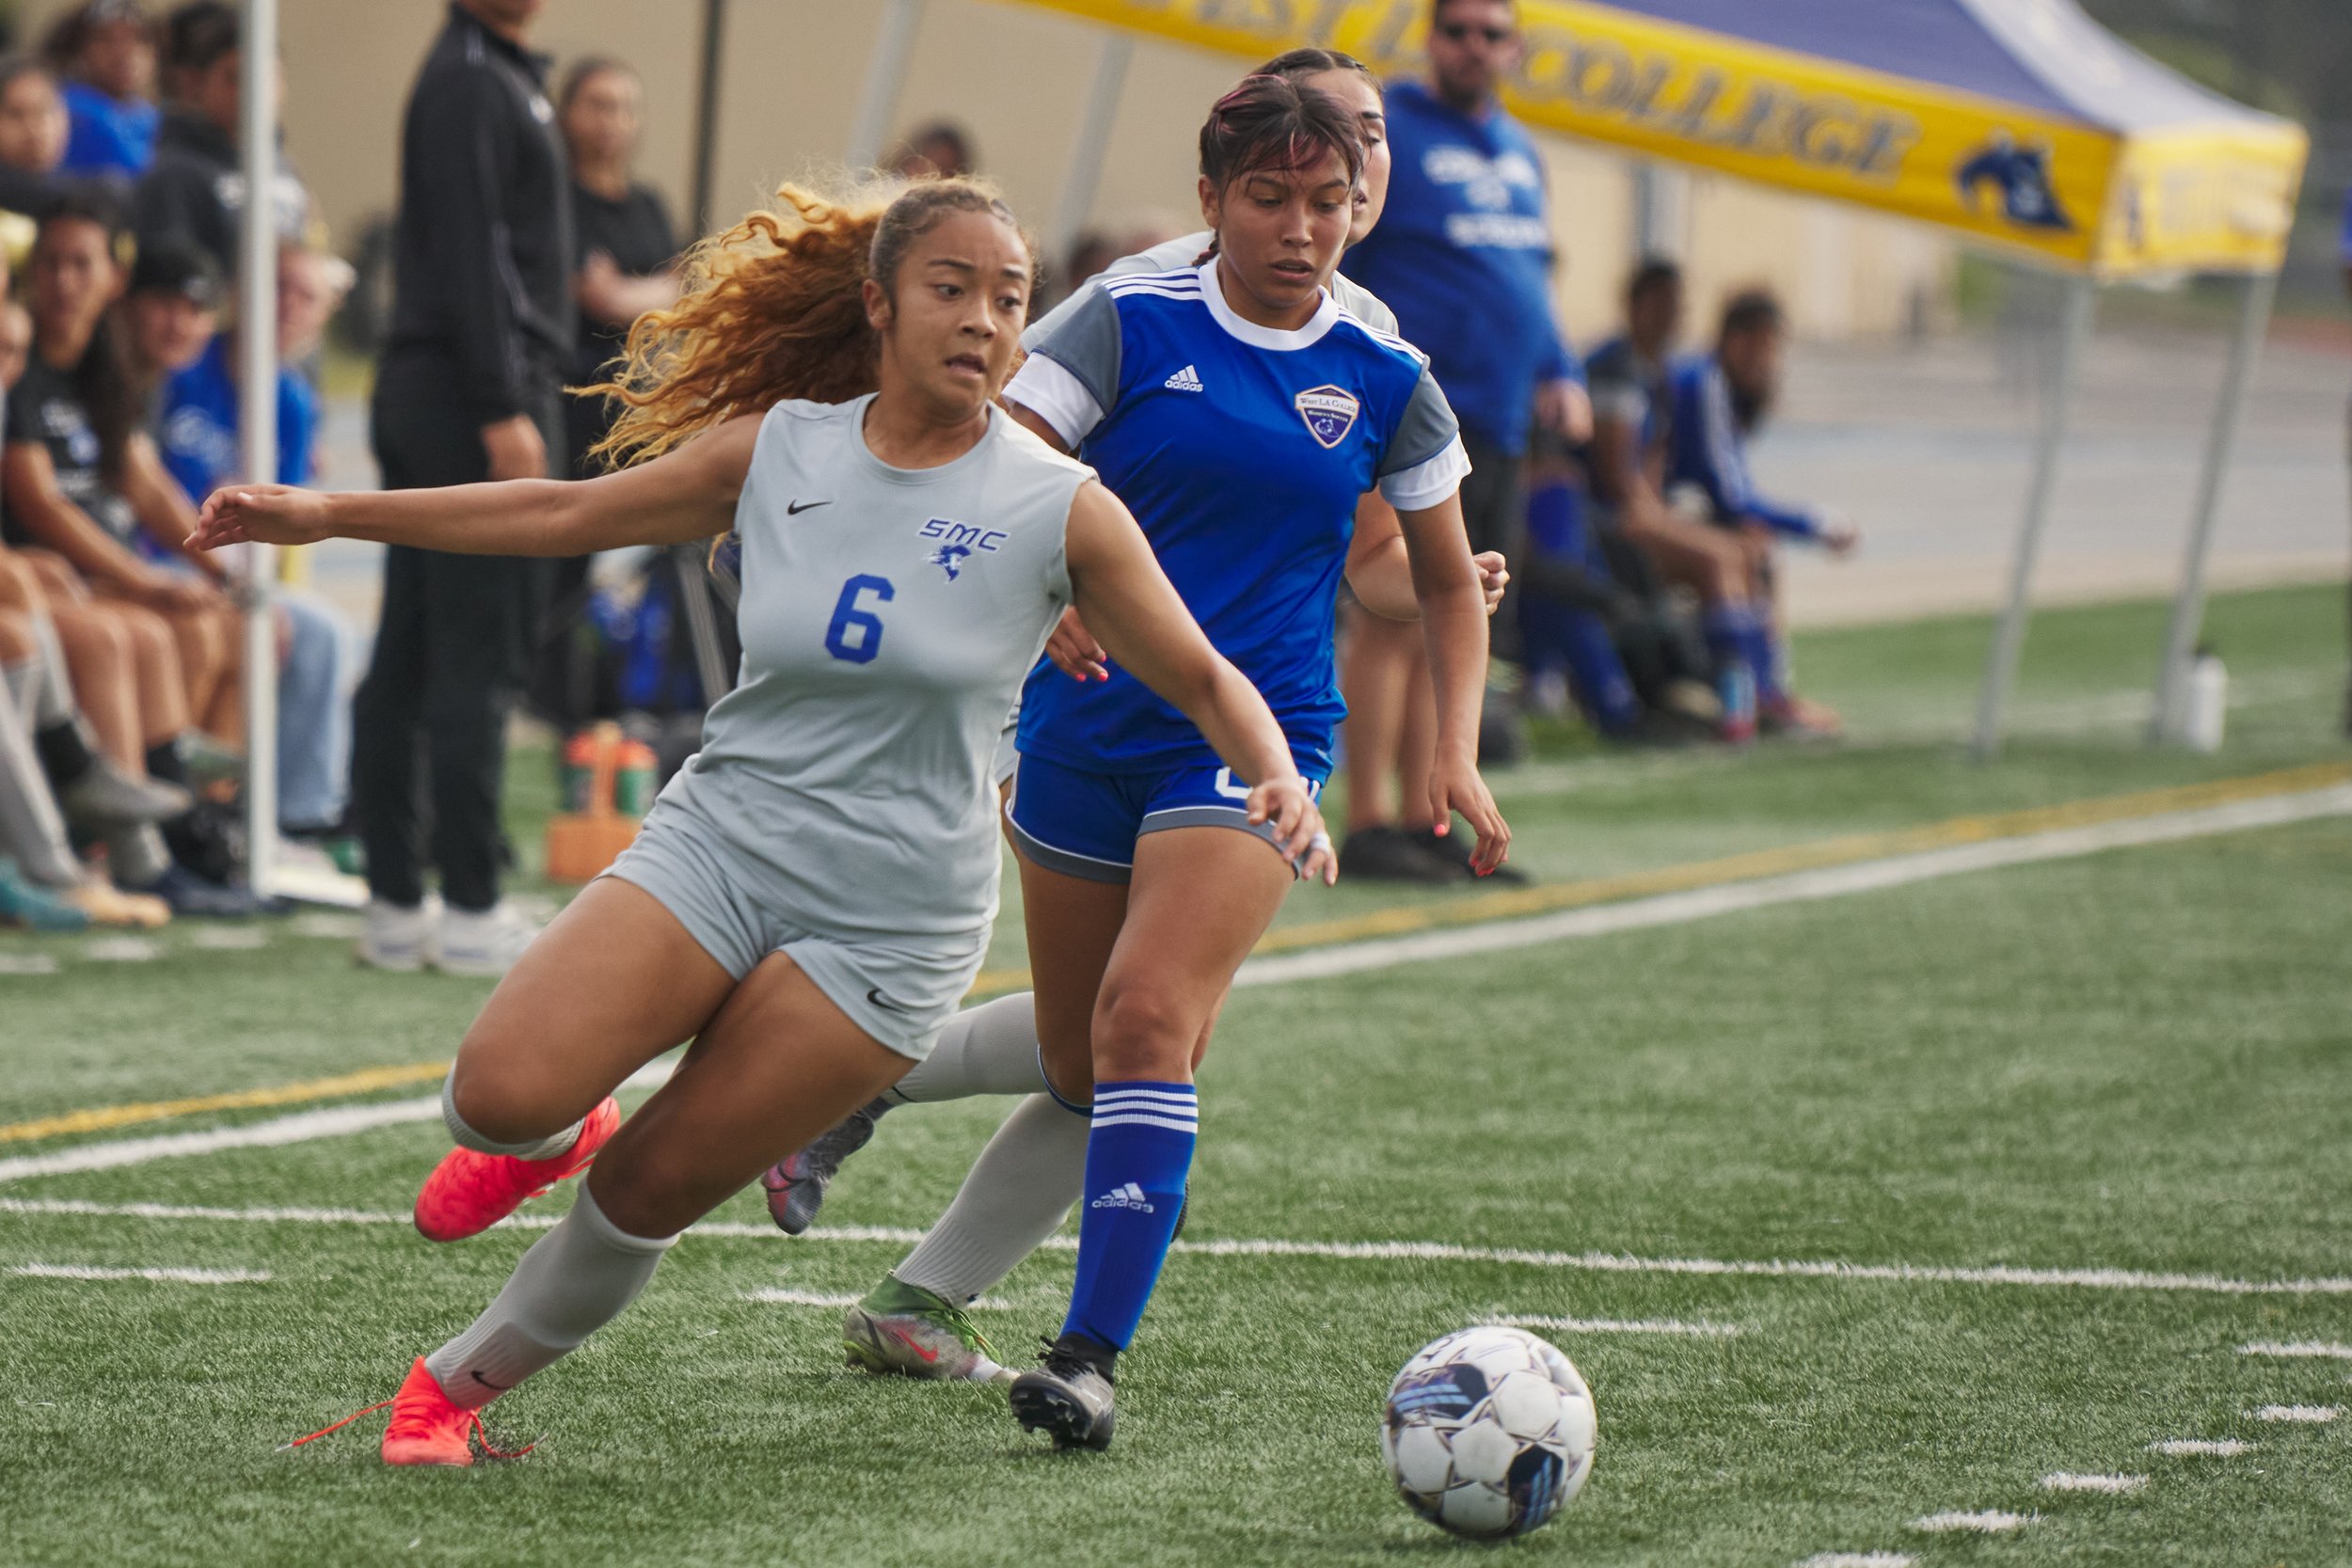  Santa Monica College Corsairs' Tia Lucas keeps control of the ball, with West Los Angeles Wildcats' Giselle Vela closely behind her, during the women's soccer match on Friday, Sept. 29, 2023, at Wildcat Stadium in Los Angeles, Calif. The Corsairs wo